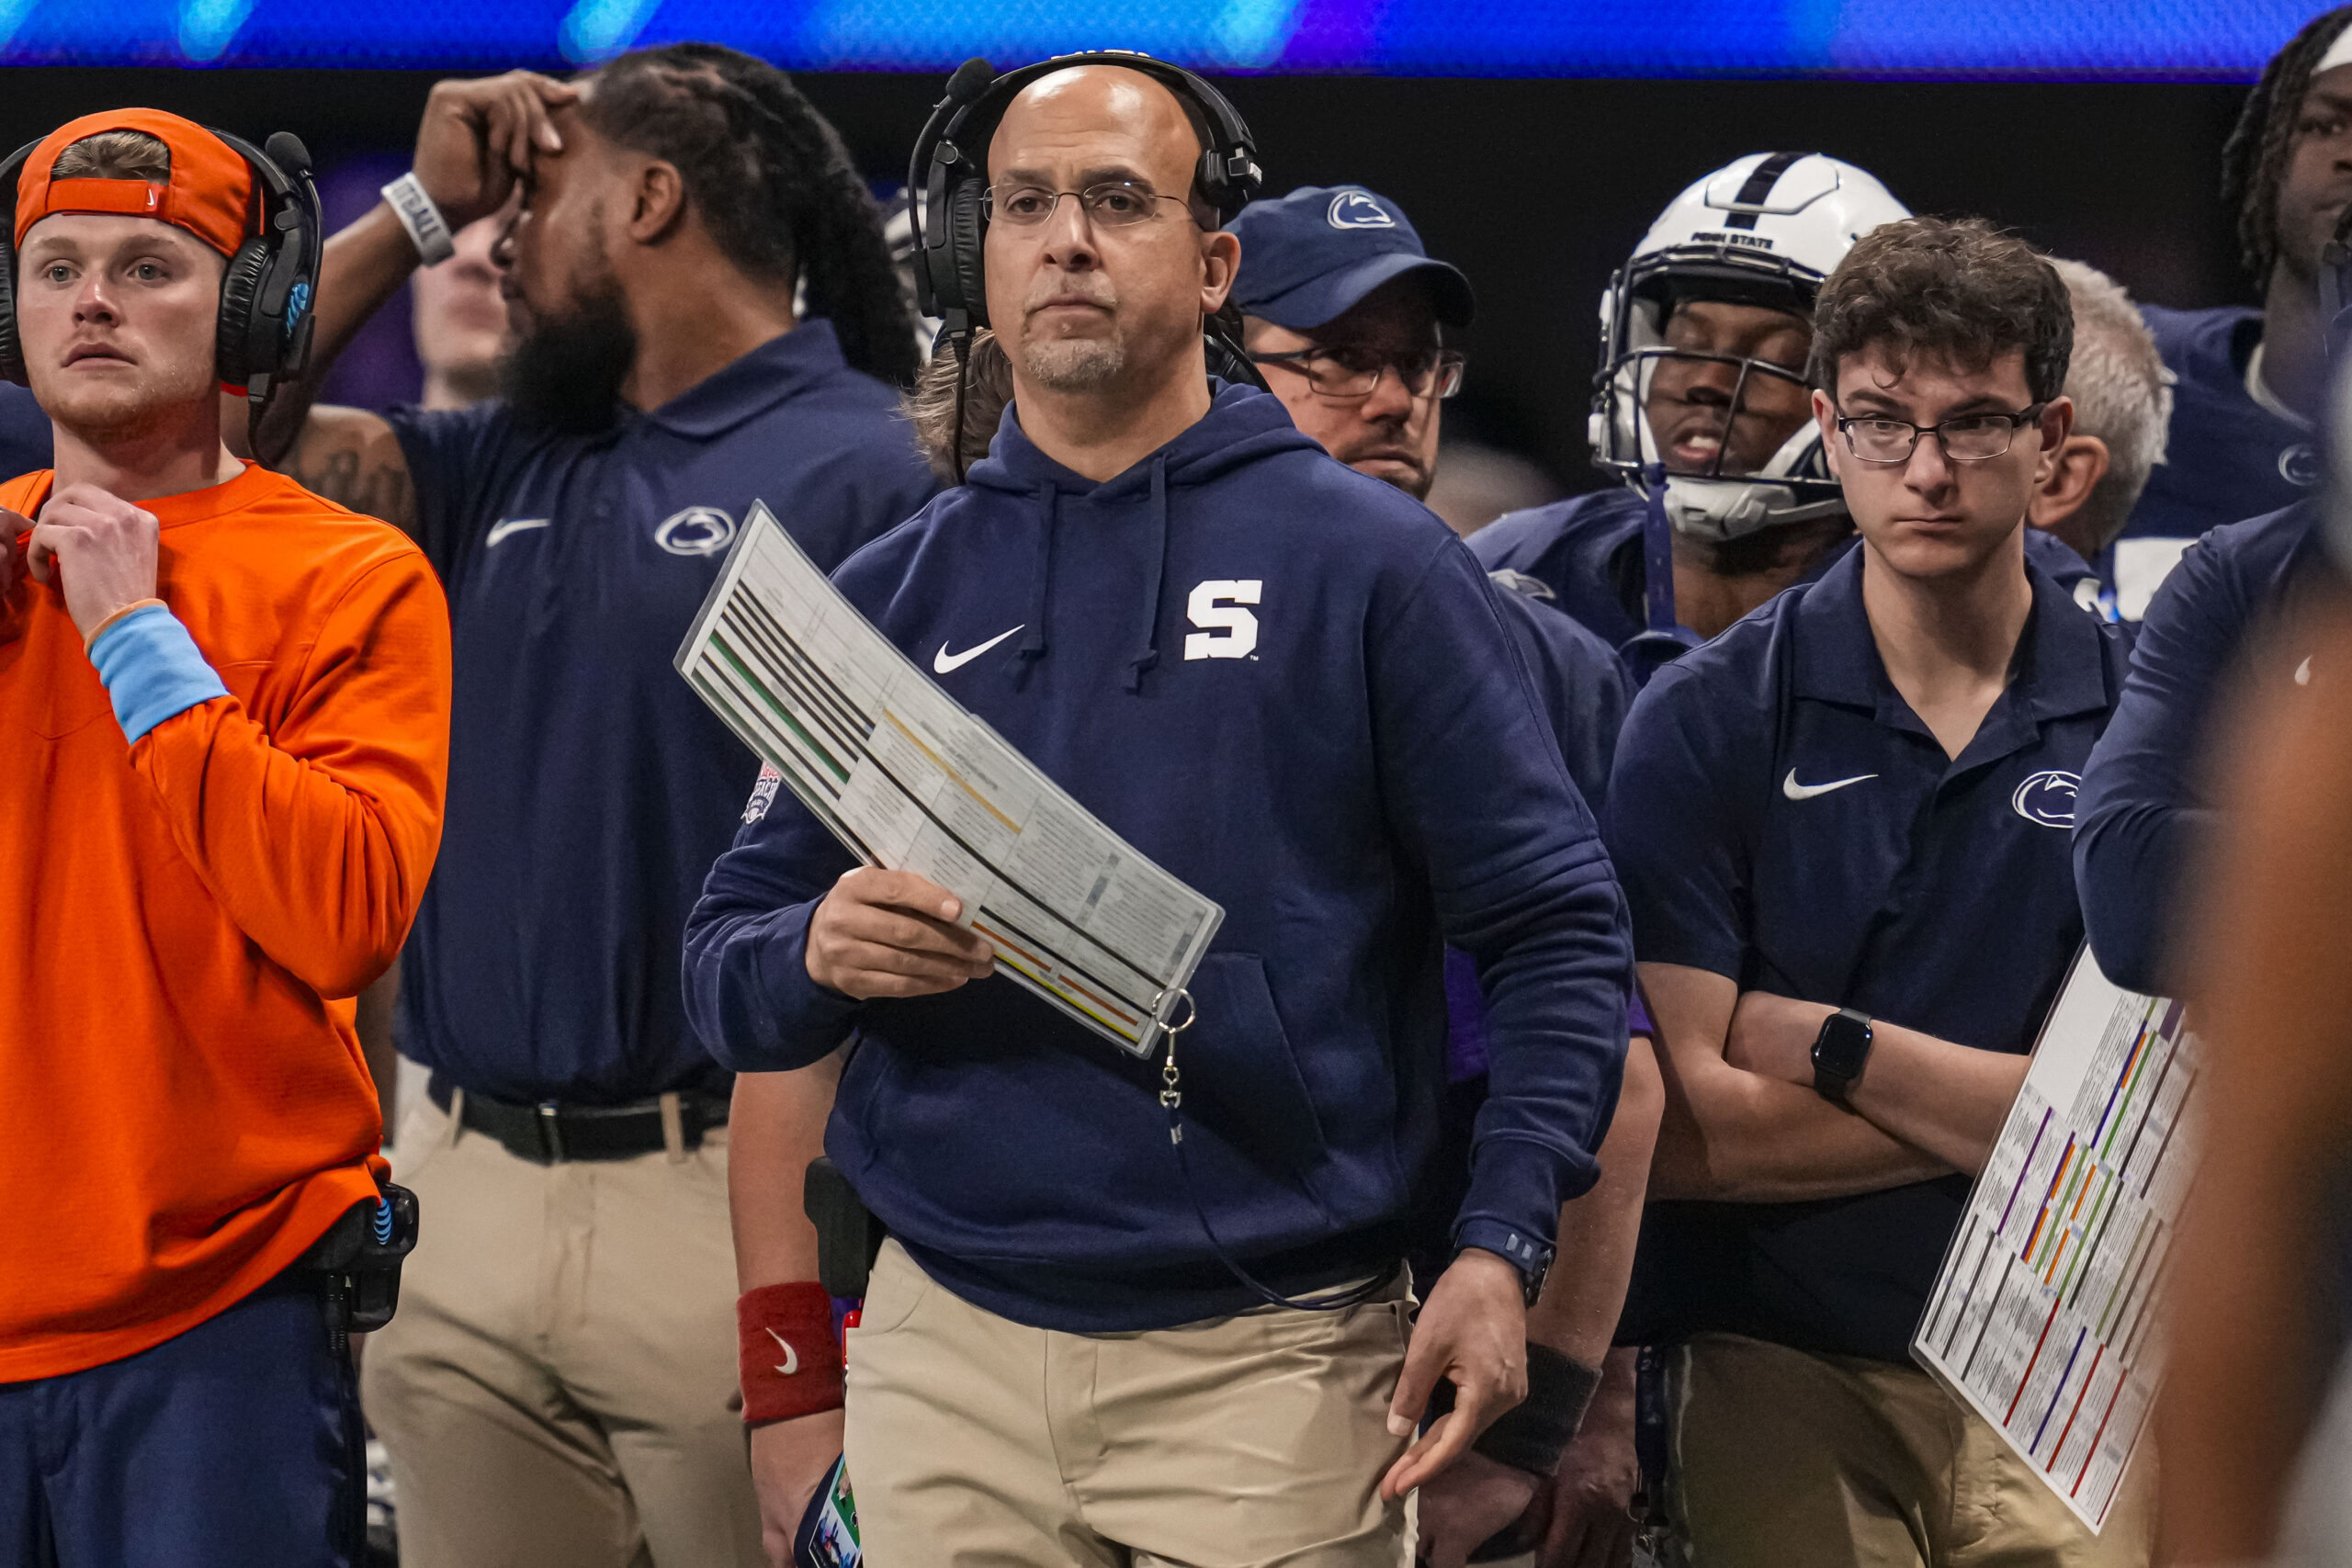 Where experts rank Penn State in their way-too-early Top 25 projections